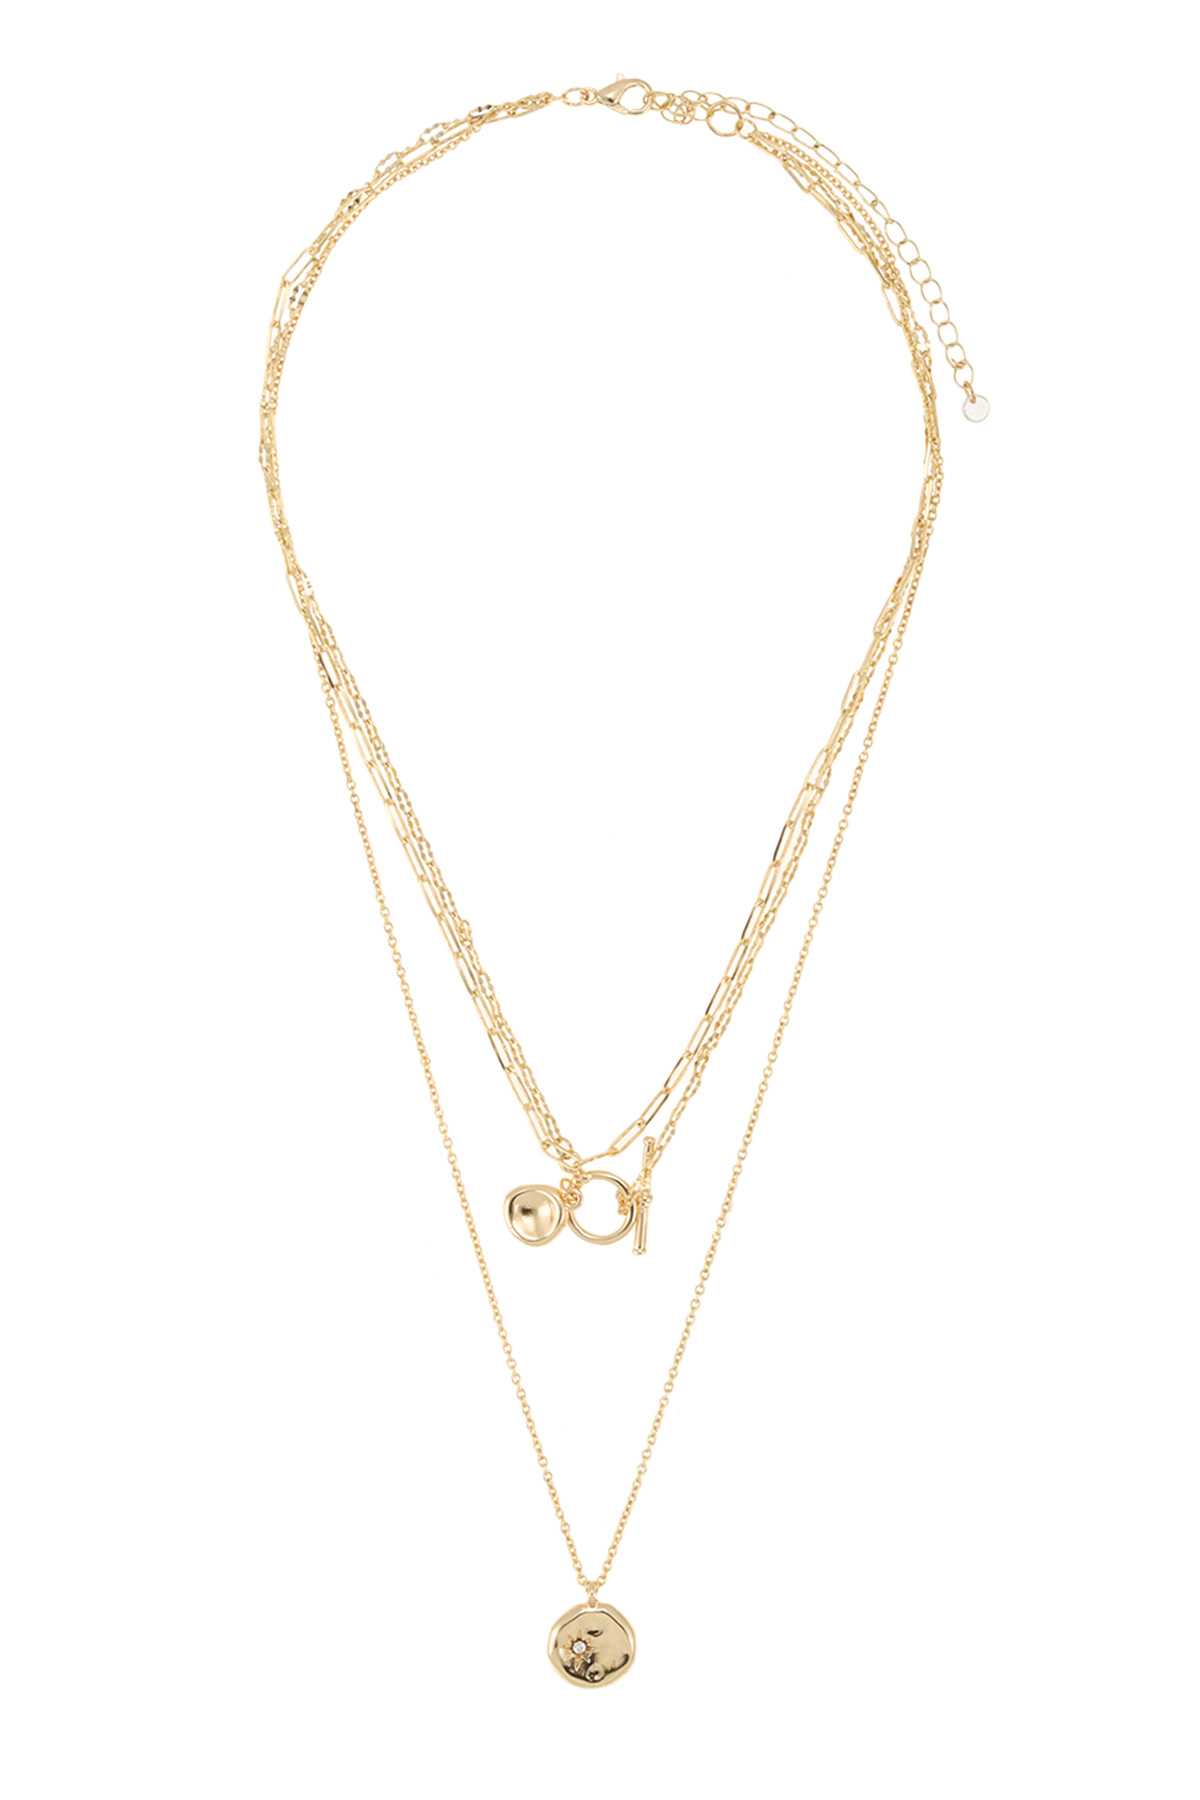 Hammered Circle Charm Chain Layered Necklace